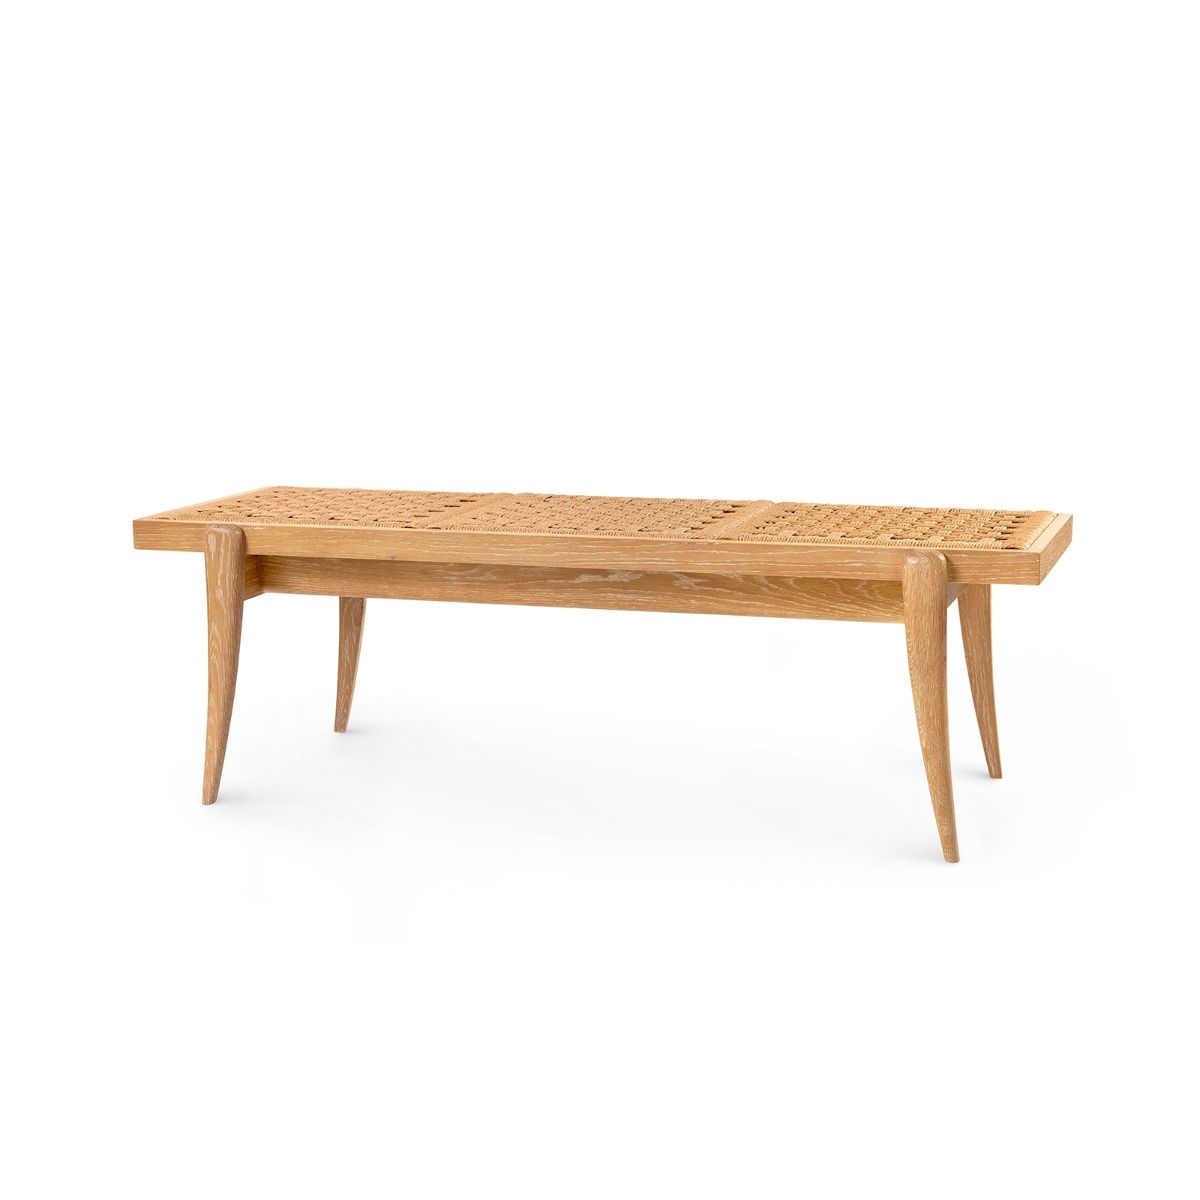 Load image into Gallery viewer, Dylan Bench NaturalBenches Bungalow 5  Natural   Four Hands, Burke Decor, Mid Century Modern Furniture, Old Bones Furniture Company, Old Bones Co, Modern Mid Century, Designer Furniture, https://www.oldbonesco.com/
